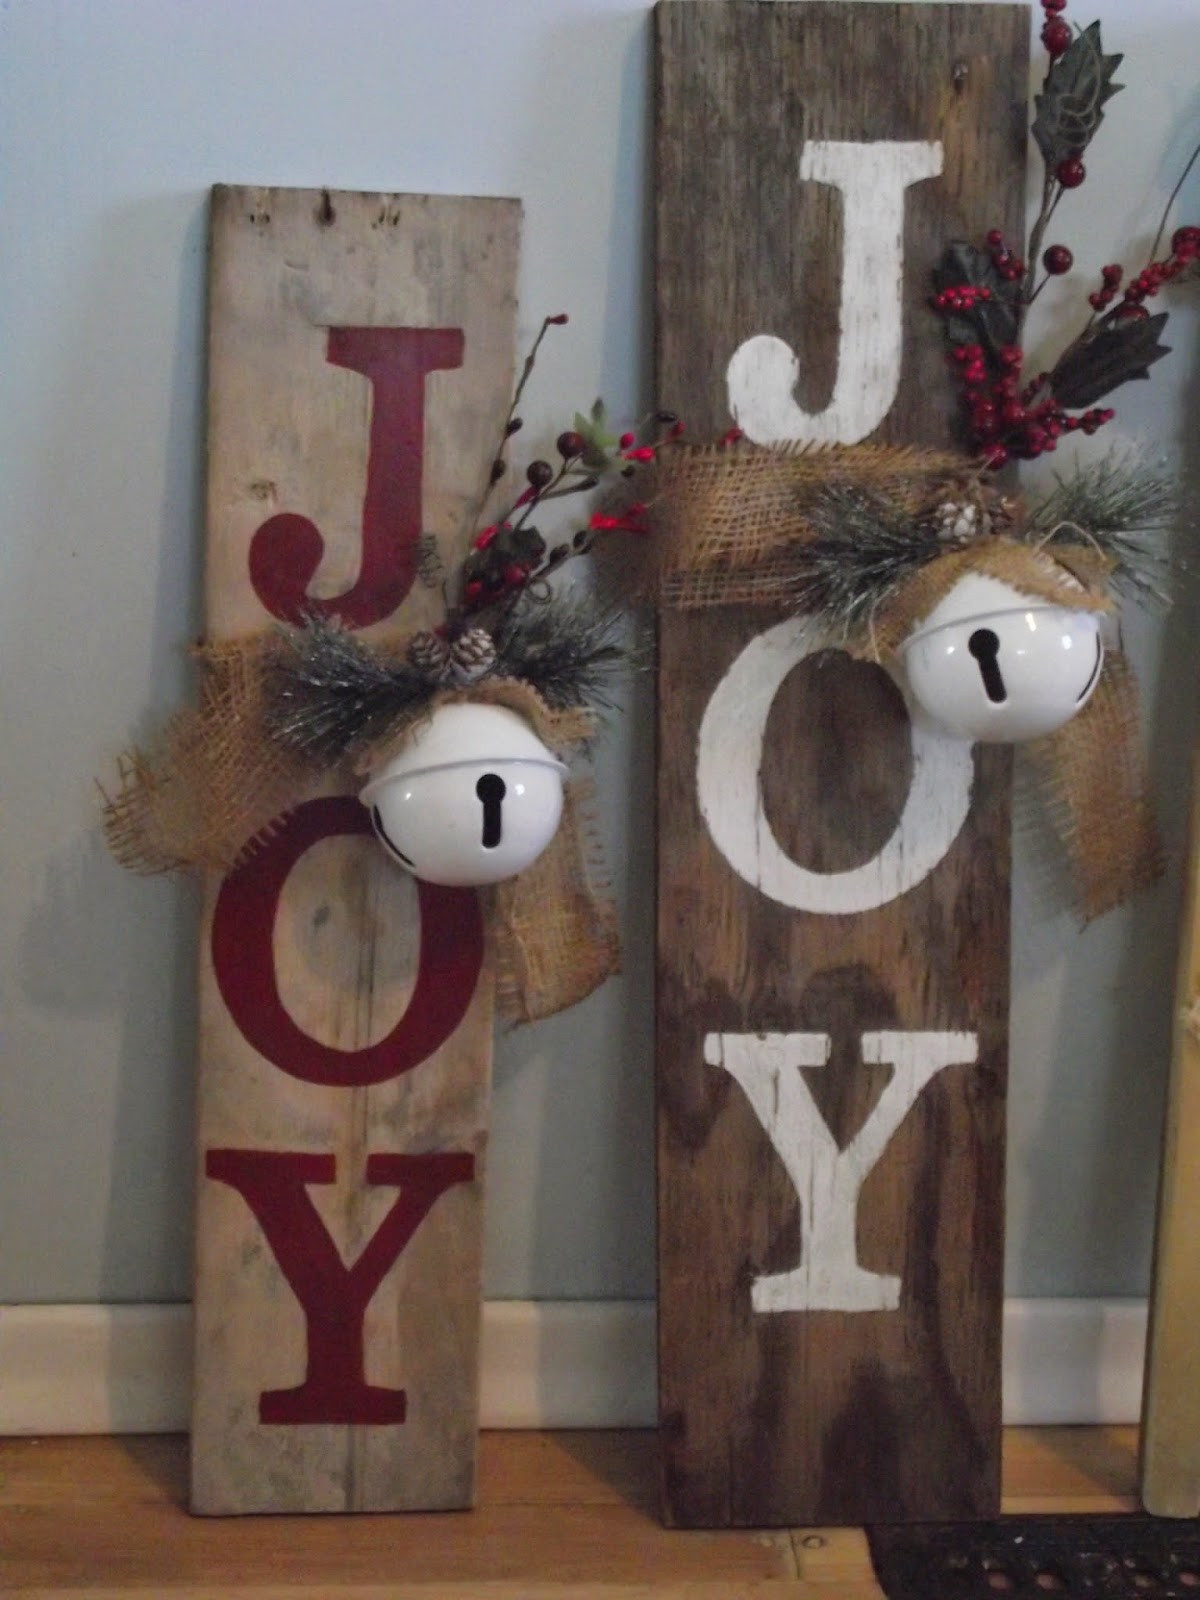 Pinterest Wood Crafts
 Country Mom at Home Christmas Crafts A Sneak Peak